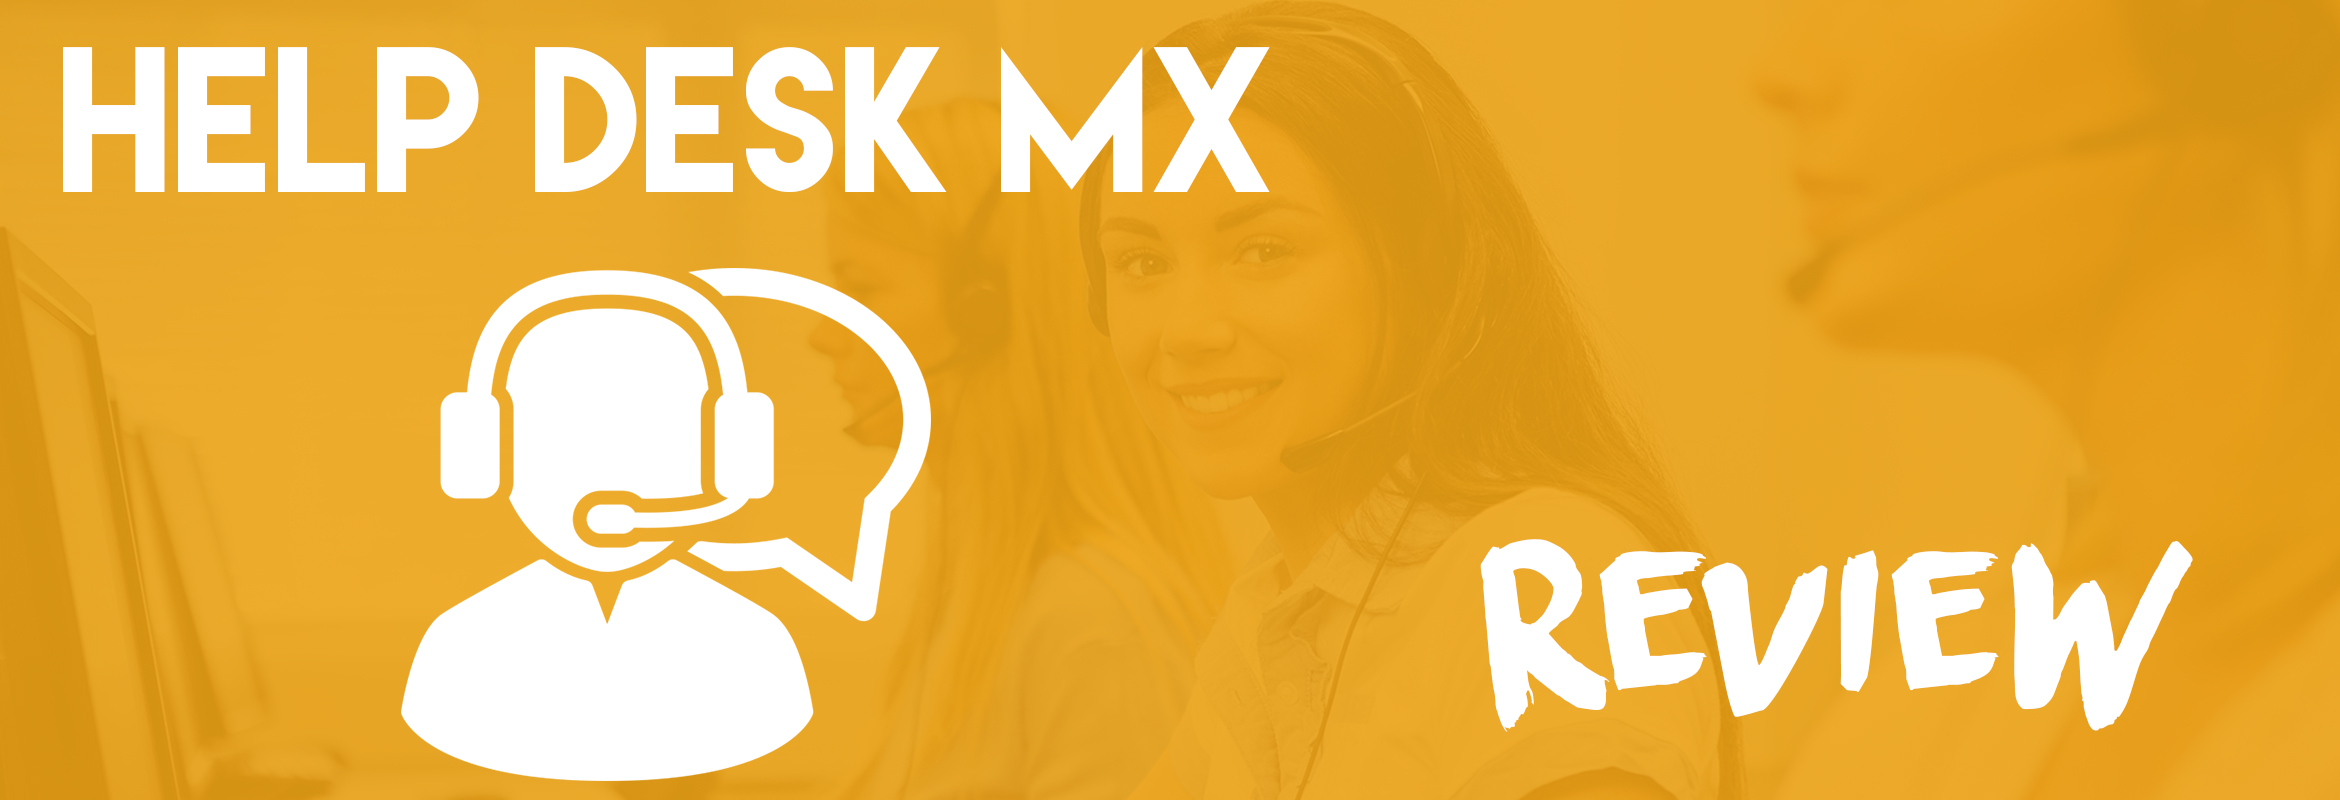 Grow Customer Trust And Loyalty With Help Desk MX Solution